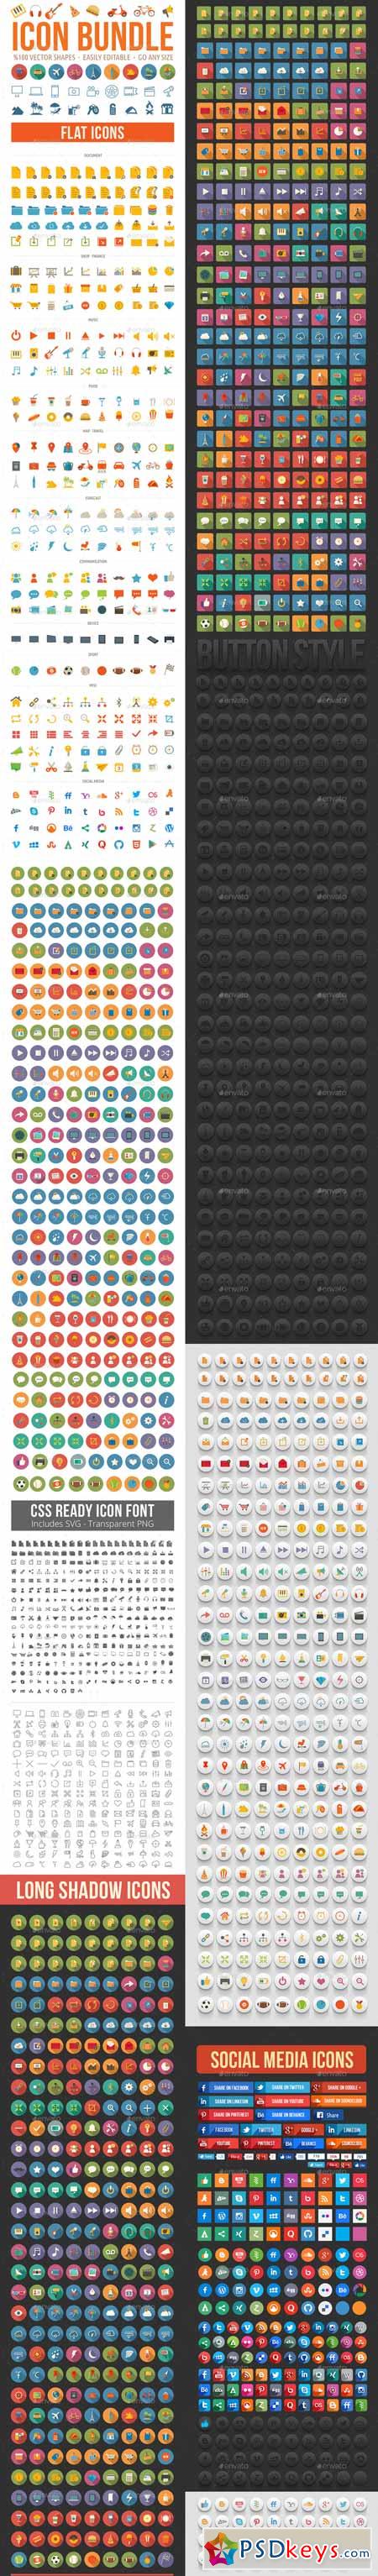 2000 Vector Icons 6660683